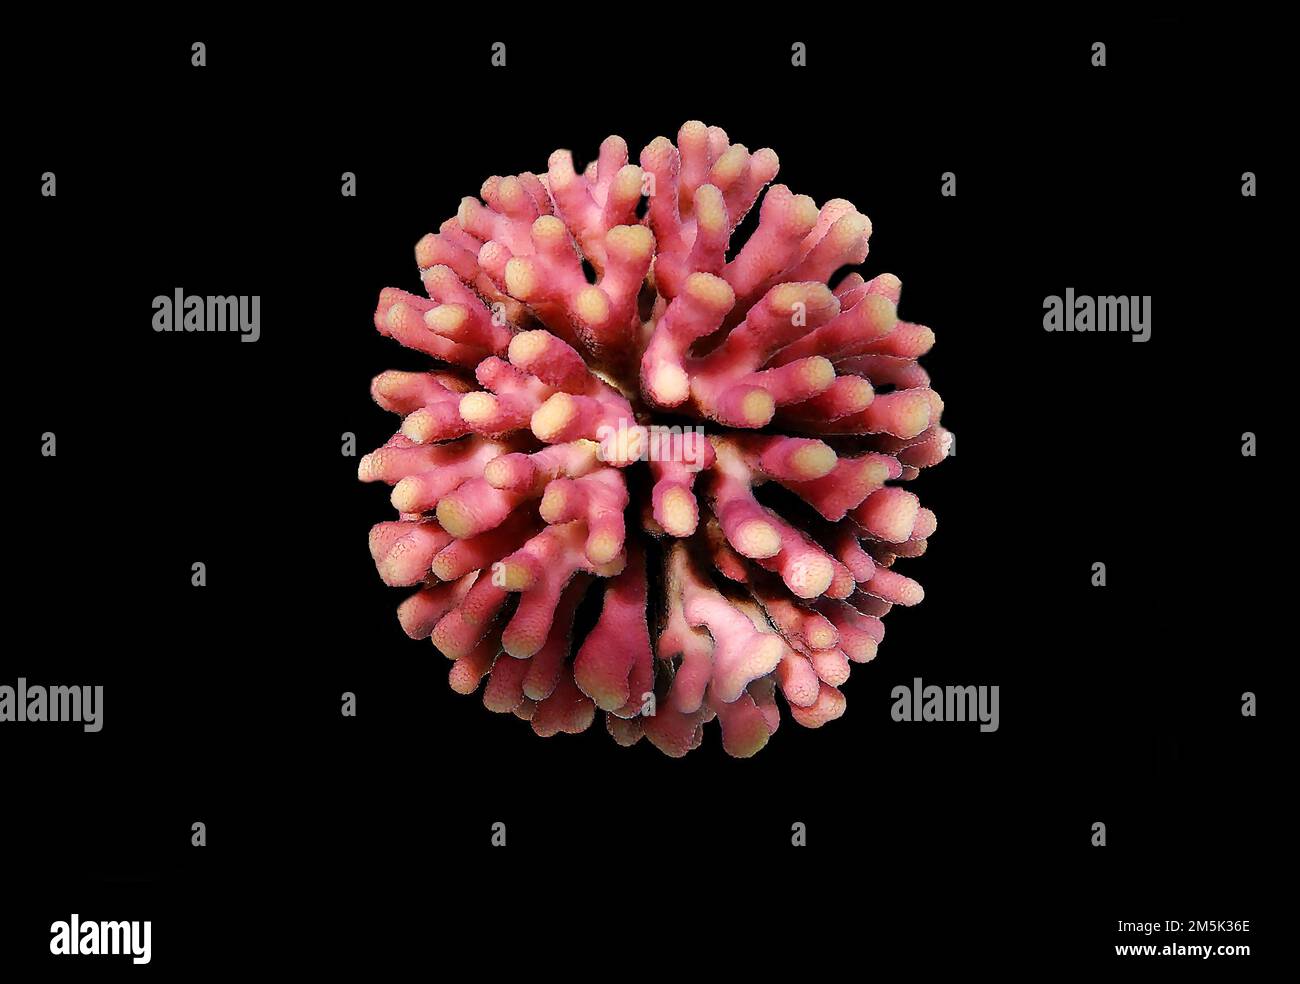 Stylophora is a genus of colonial stony corals in the family Pocilloporidae Stock Photo